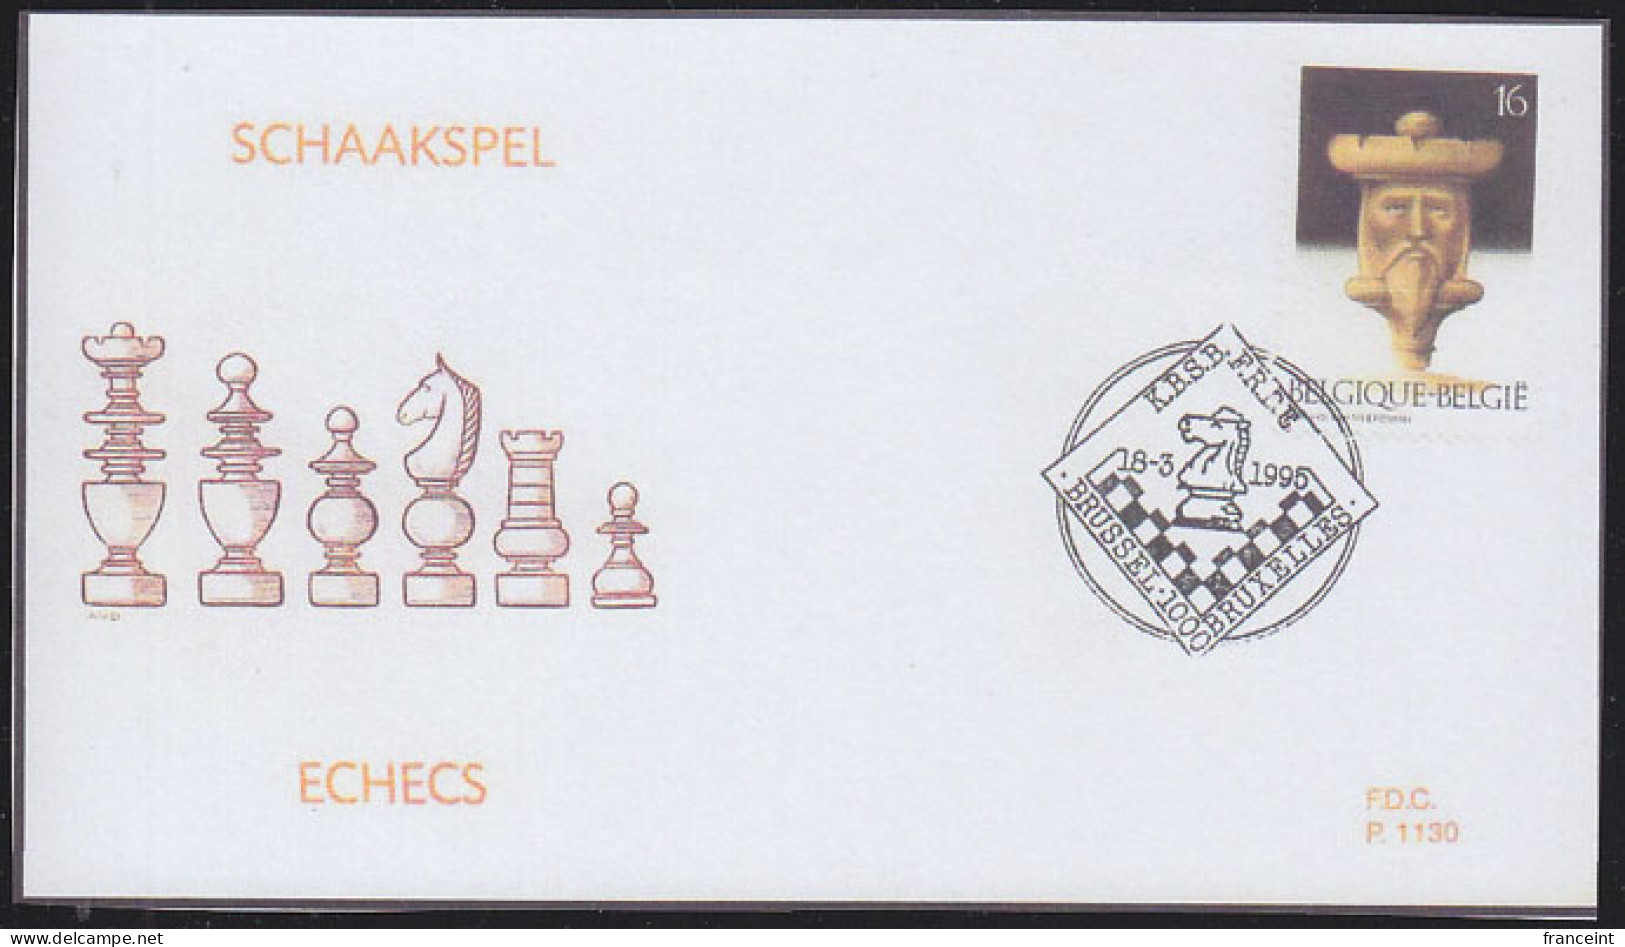 BELGIUM(1995) Chess Pieces. Die Proof In Brown Signed By The Engraver, Representing The FDC Cachet. Scott No 1577. - Proeven & Herdruk